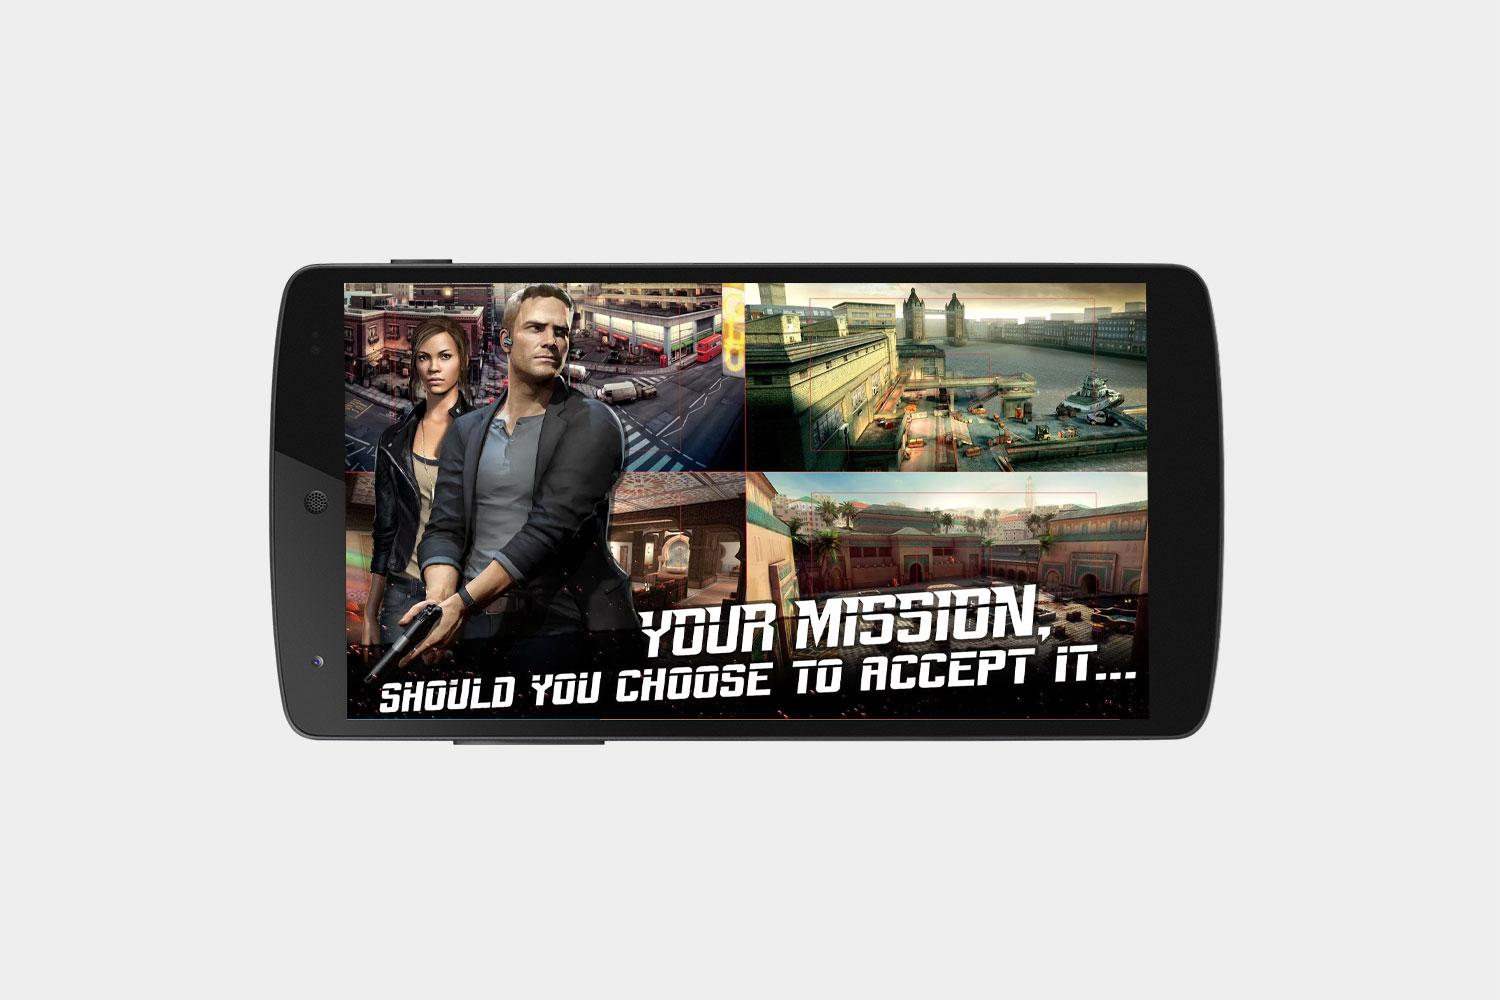 GTA 5 mobile APK + OBB download links for Android: Should you trust them?